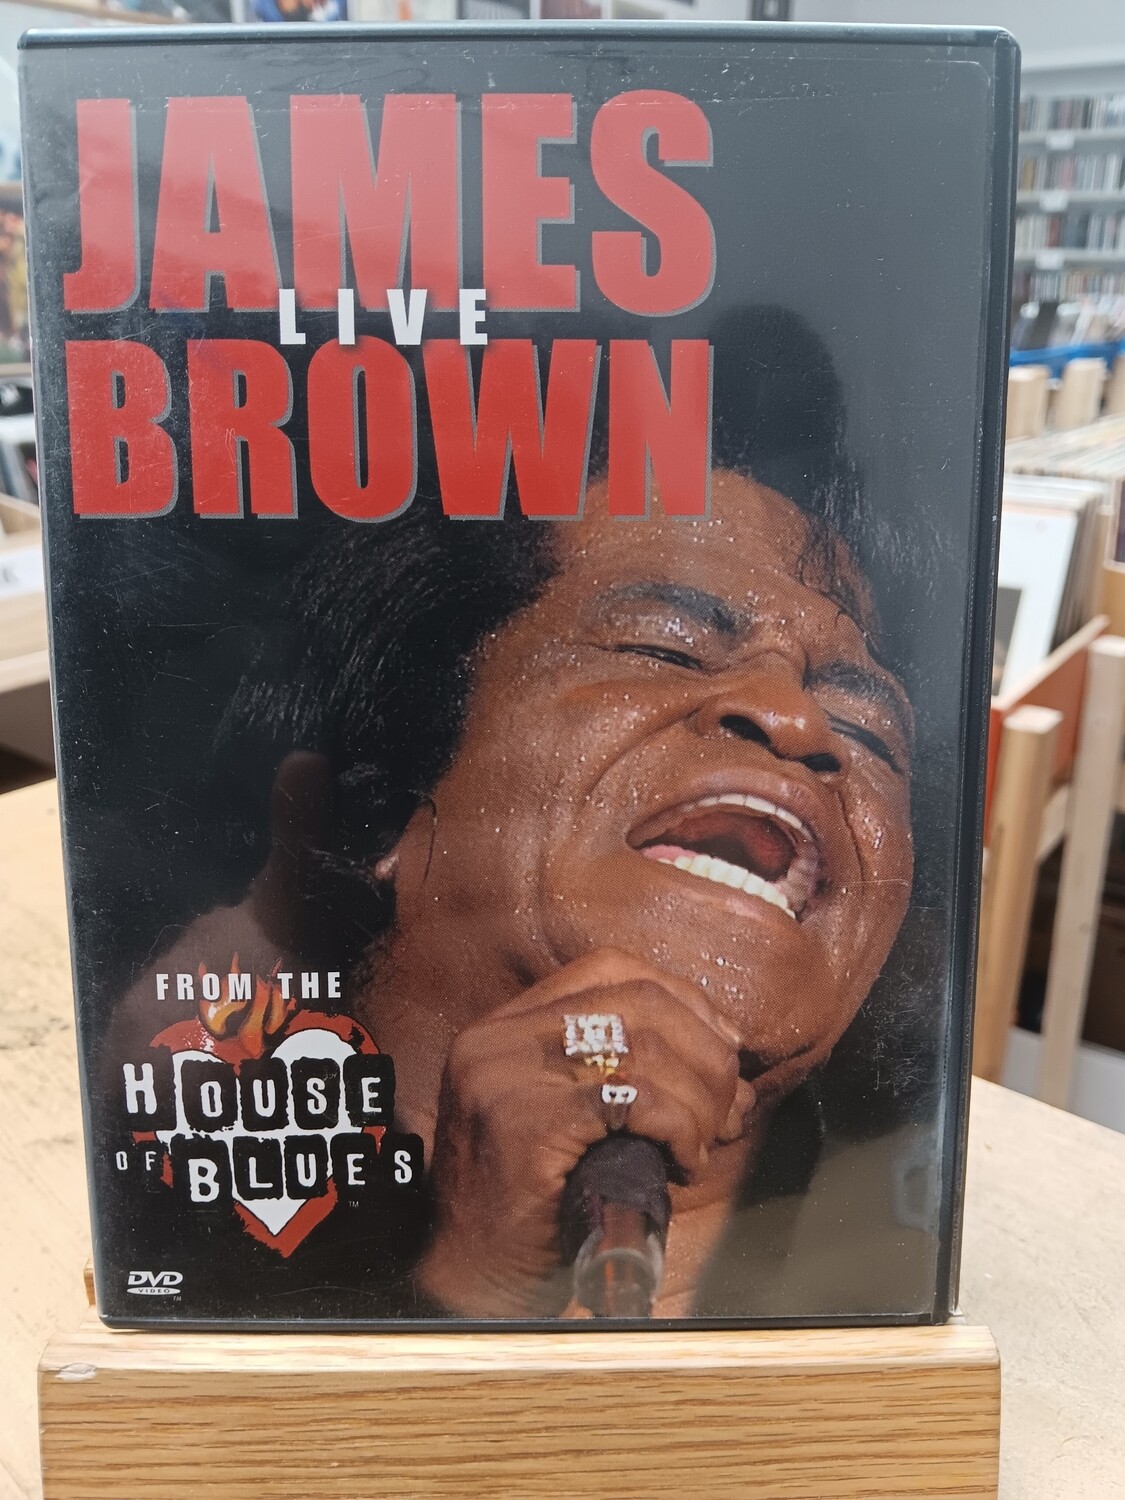 JAMES BROWN - Live from The House of Blues (DVD)